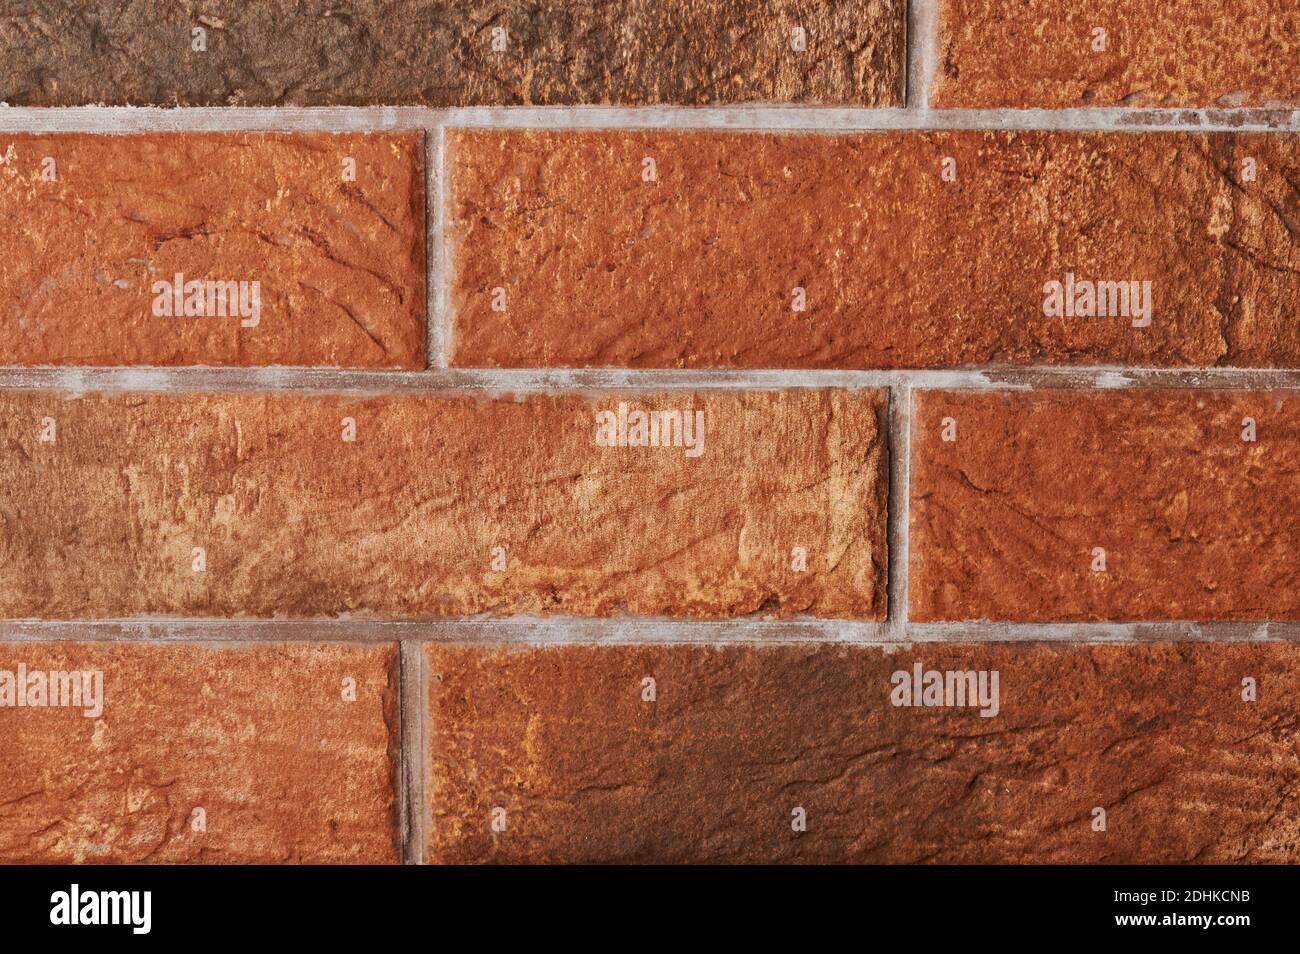 Orange color brick wall background close up view Stock Photo